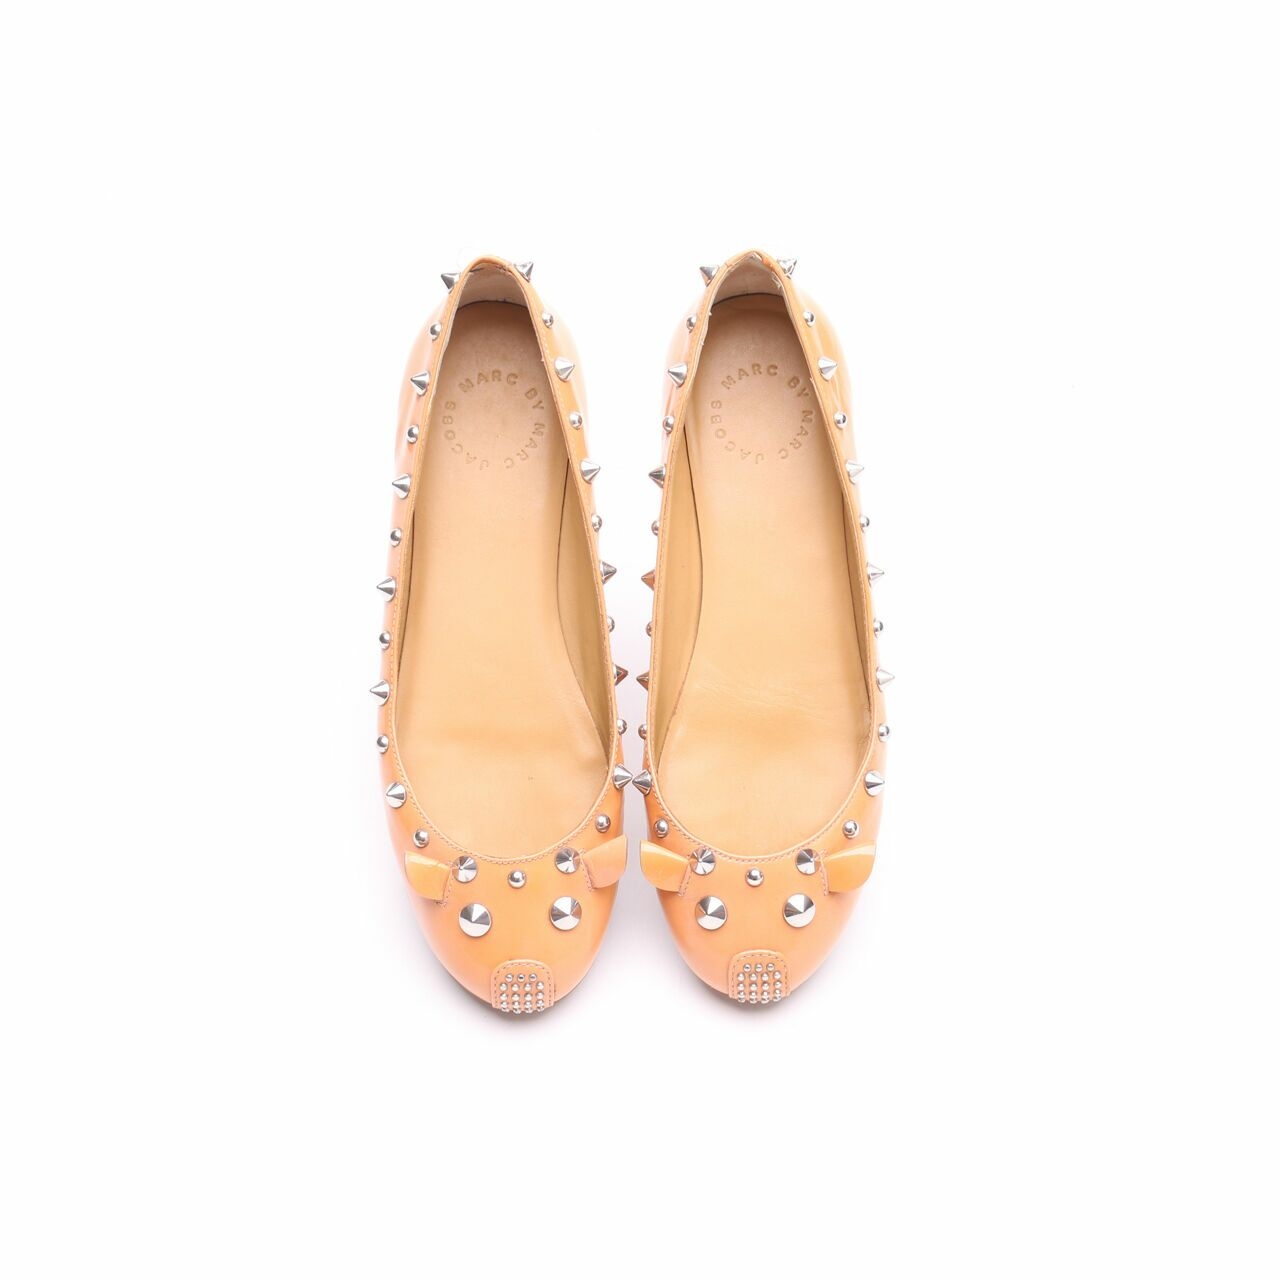 Marc by Marc Jacobs Piggy Pink Flat Shoes